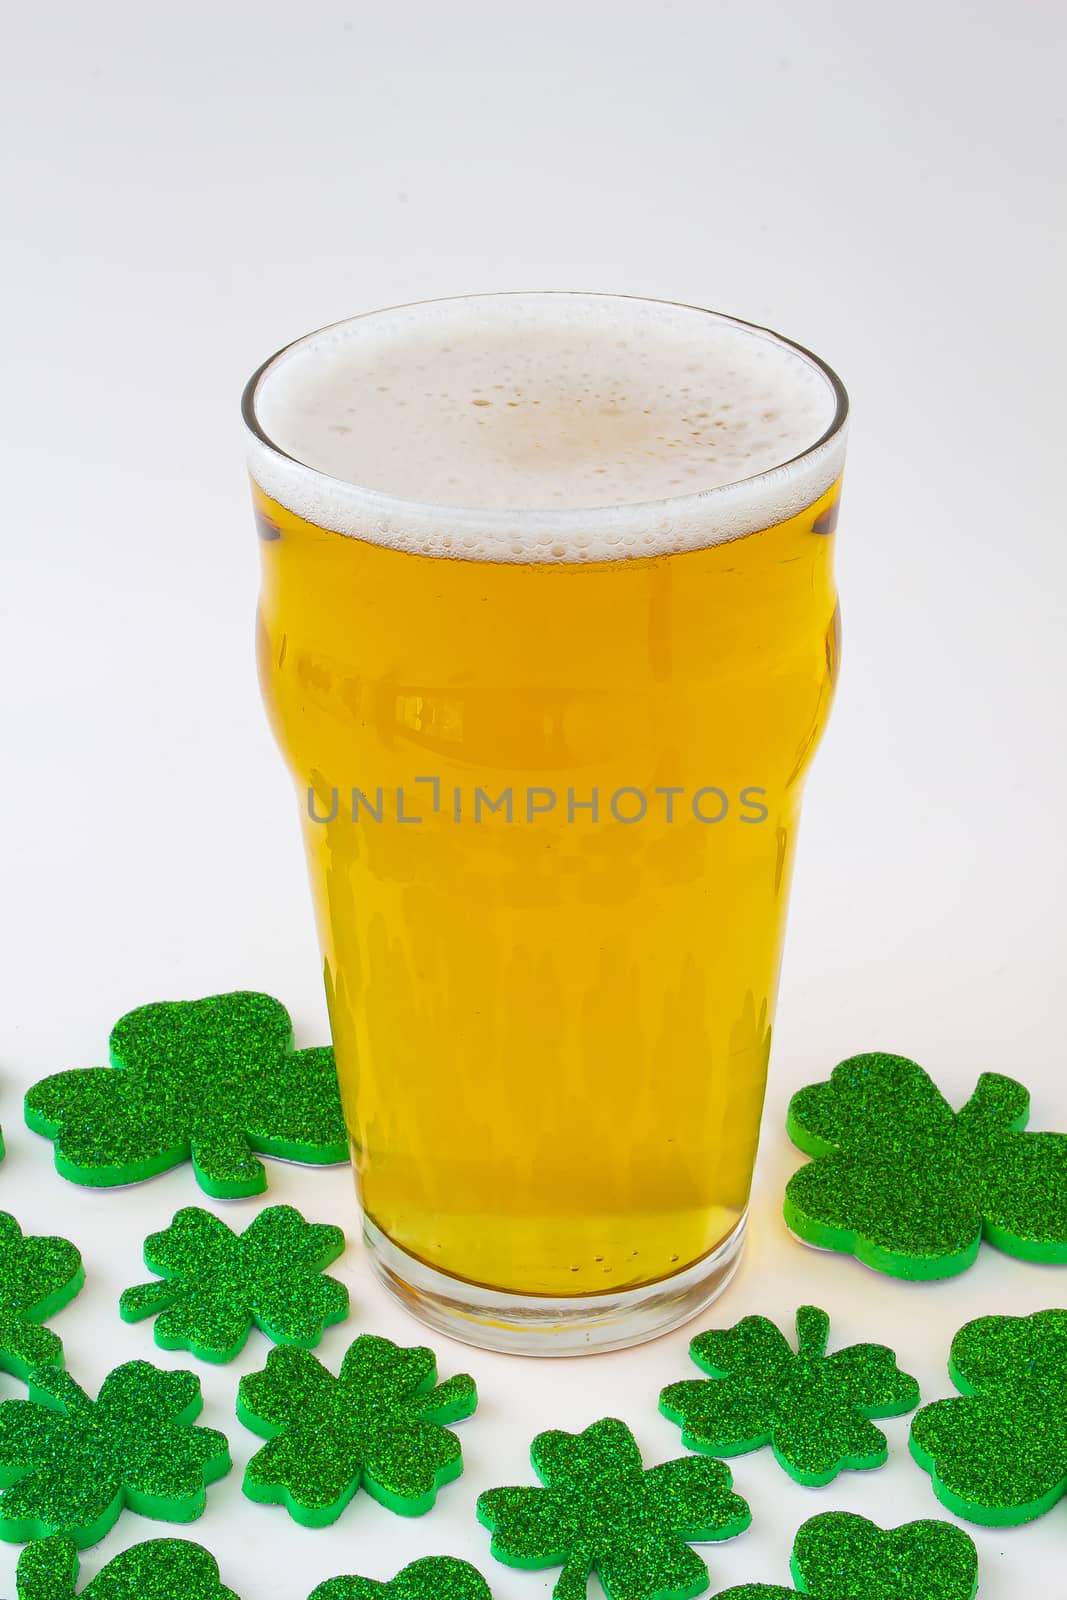 A Pint of beer with green clovers around by oasisamuel